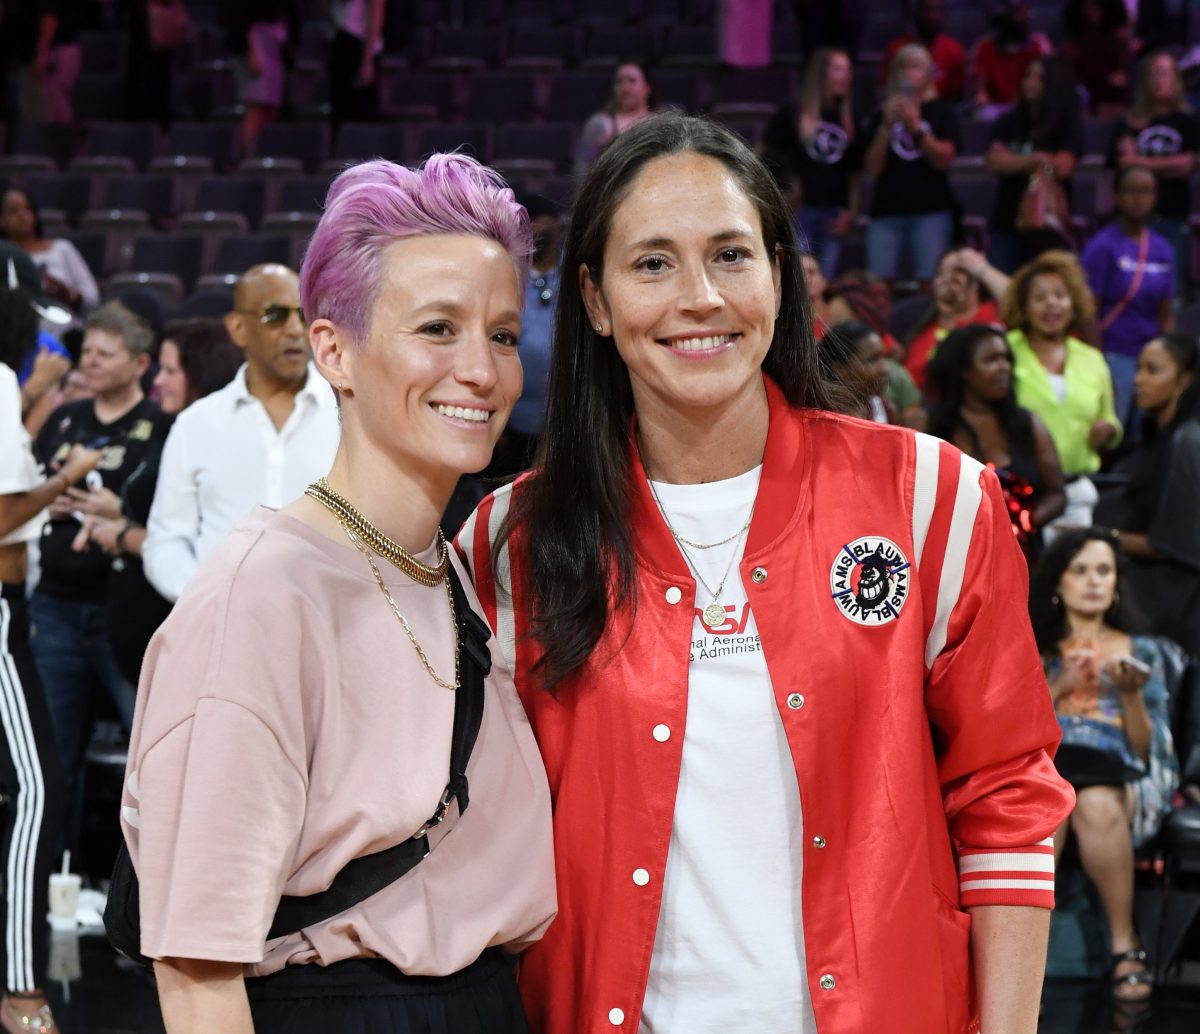 Megan Rapinoe and Sue Bird pose for photos on the court after attending the WNBA All-Star Game